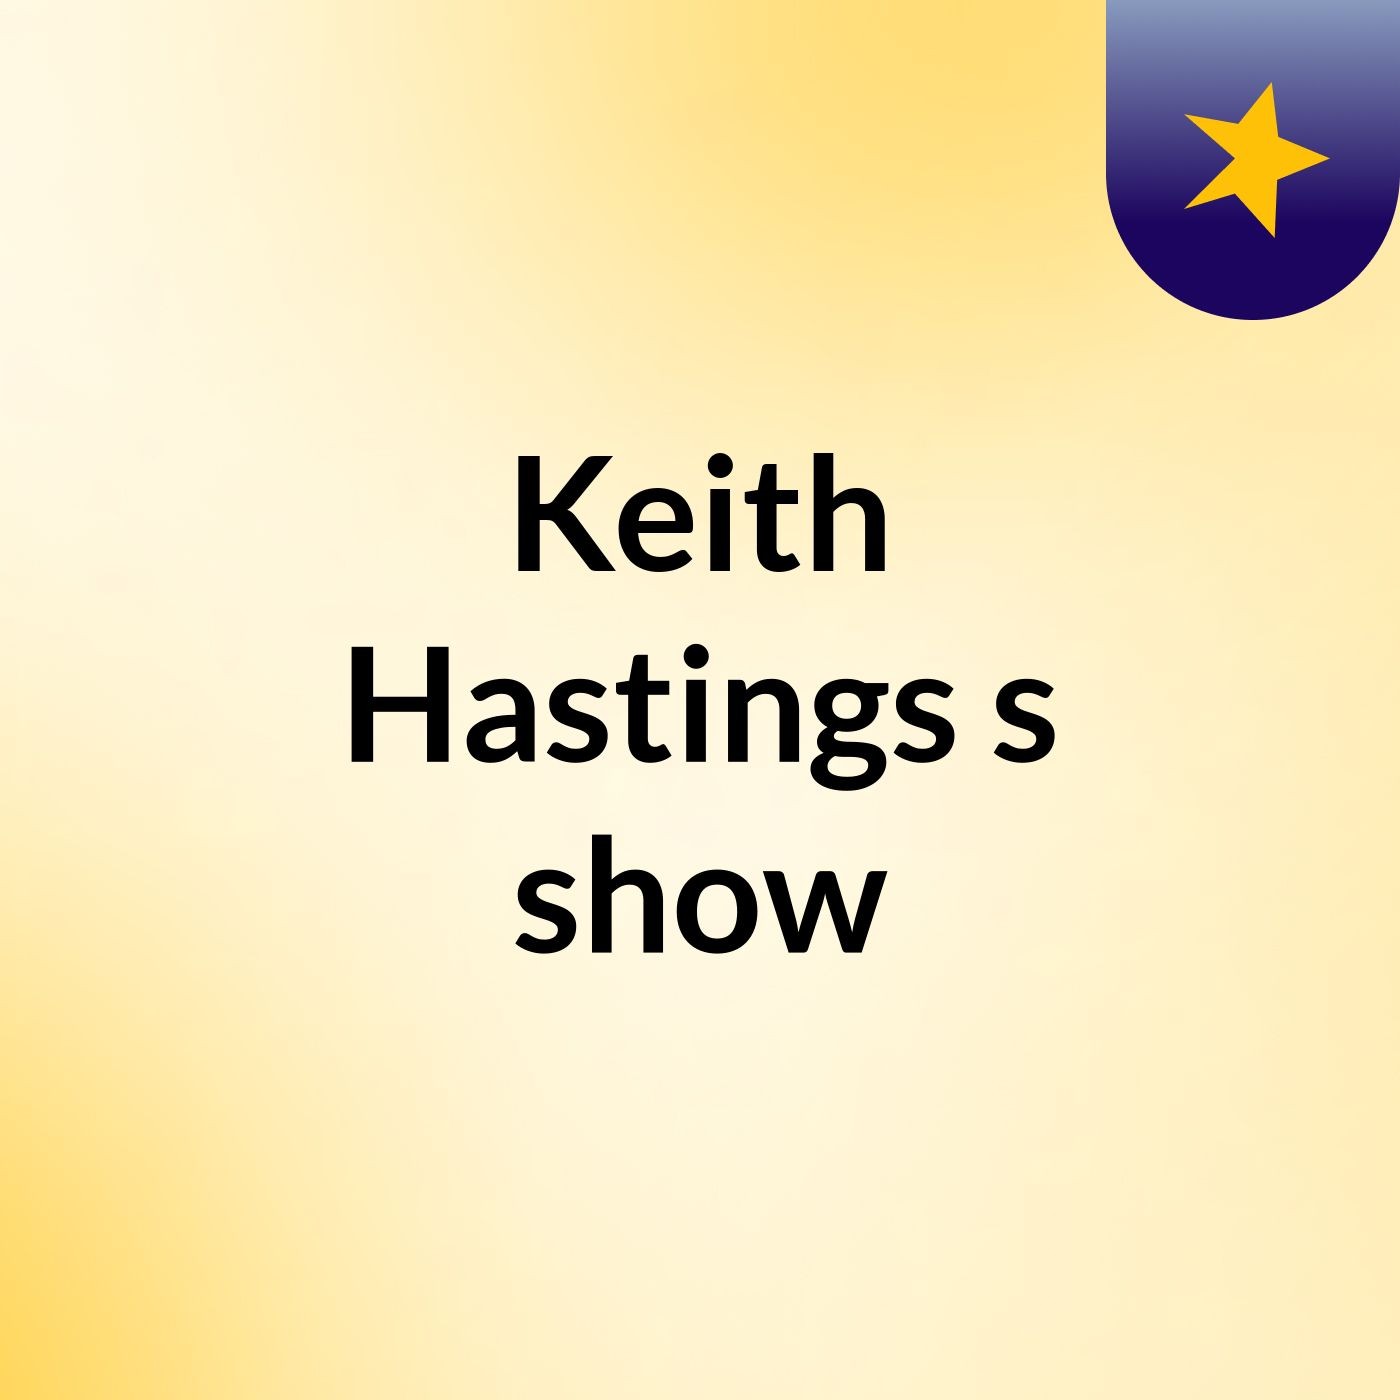 Keith Hastings's show